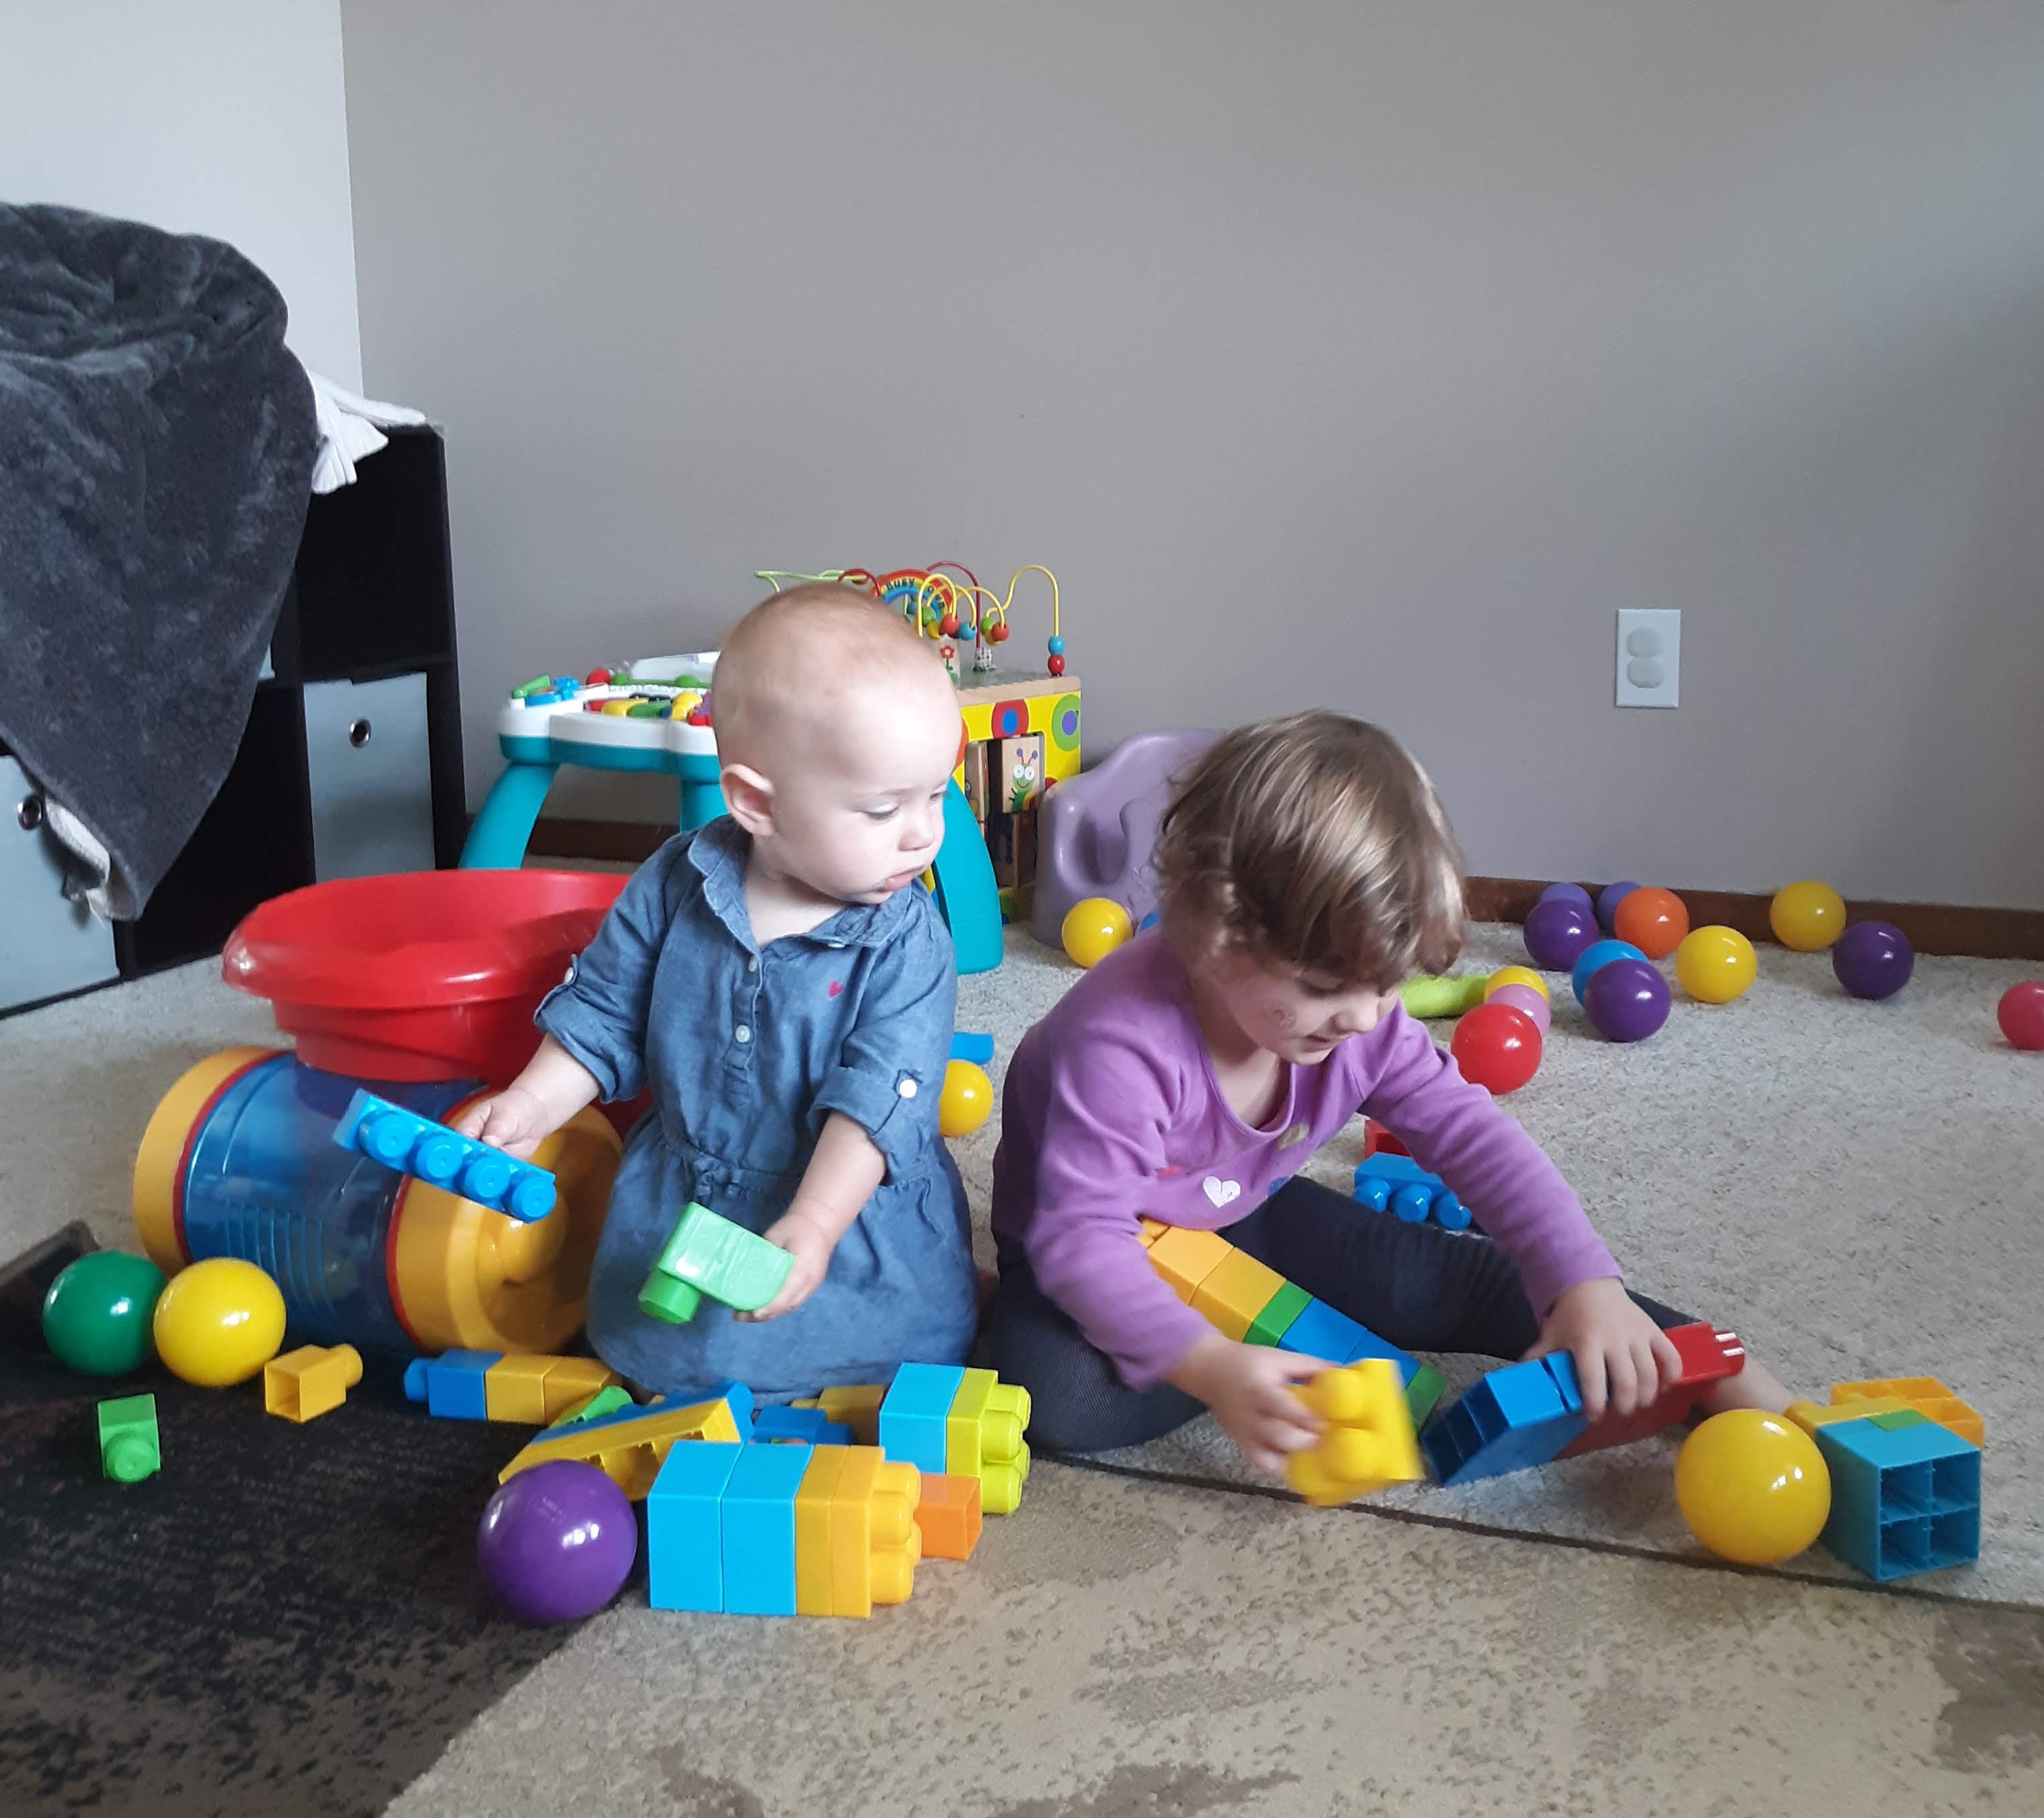 Toddlers playing with blocks and balls in a messy living room.